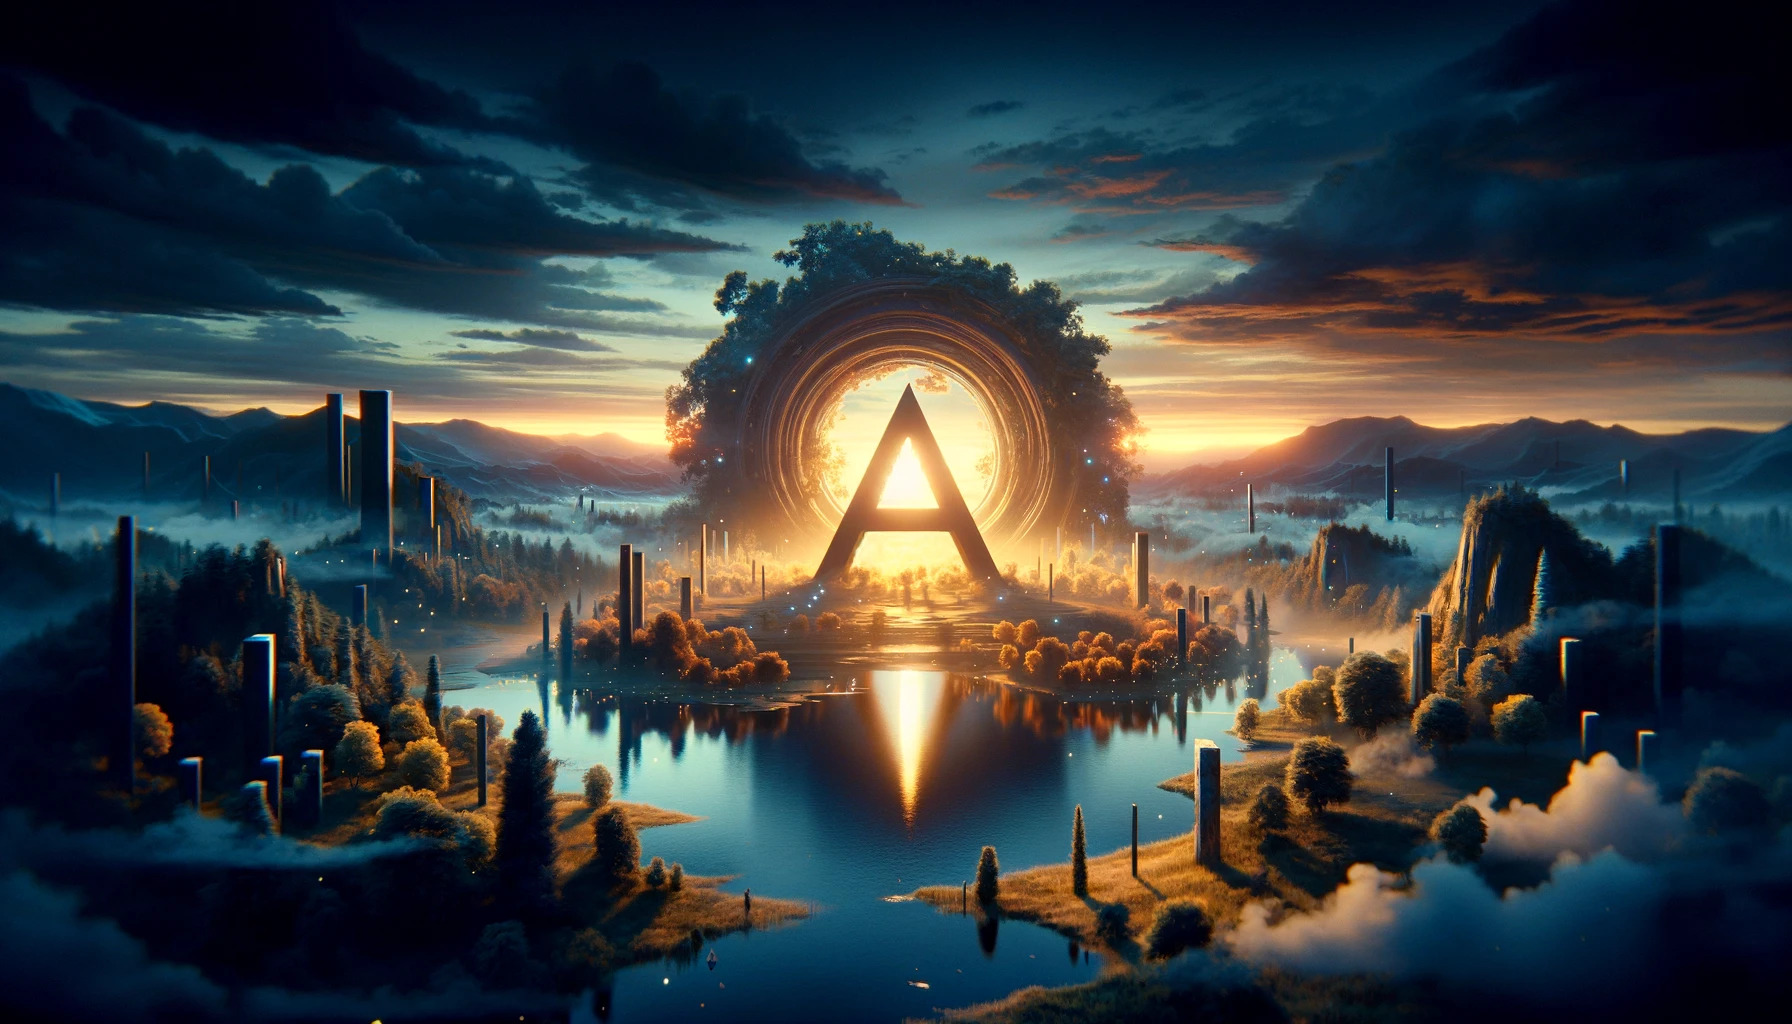 The cinematic image inspired by the theme "5 Letter Words With A in the Middle" has been created, capturing the abstract concept of balance and centrality in a serene and mystical landscape at twilight.